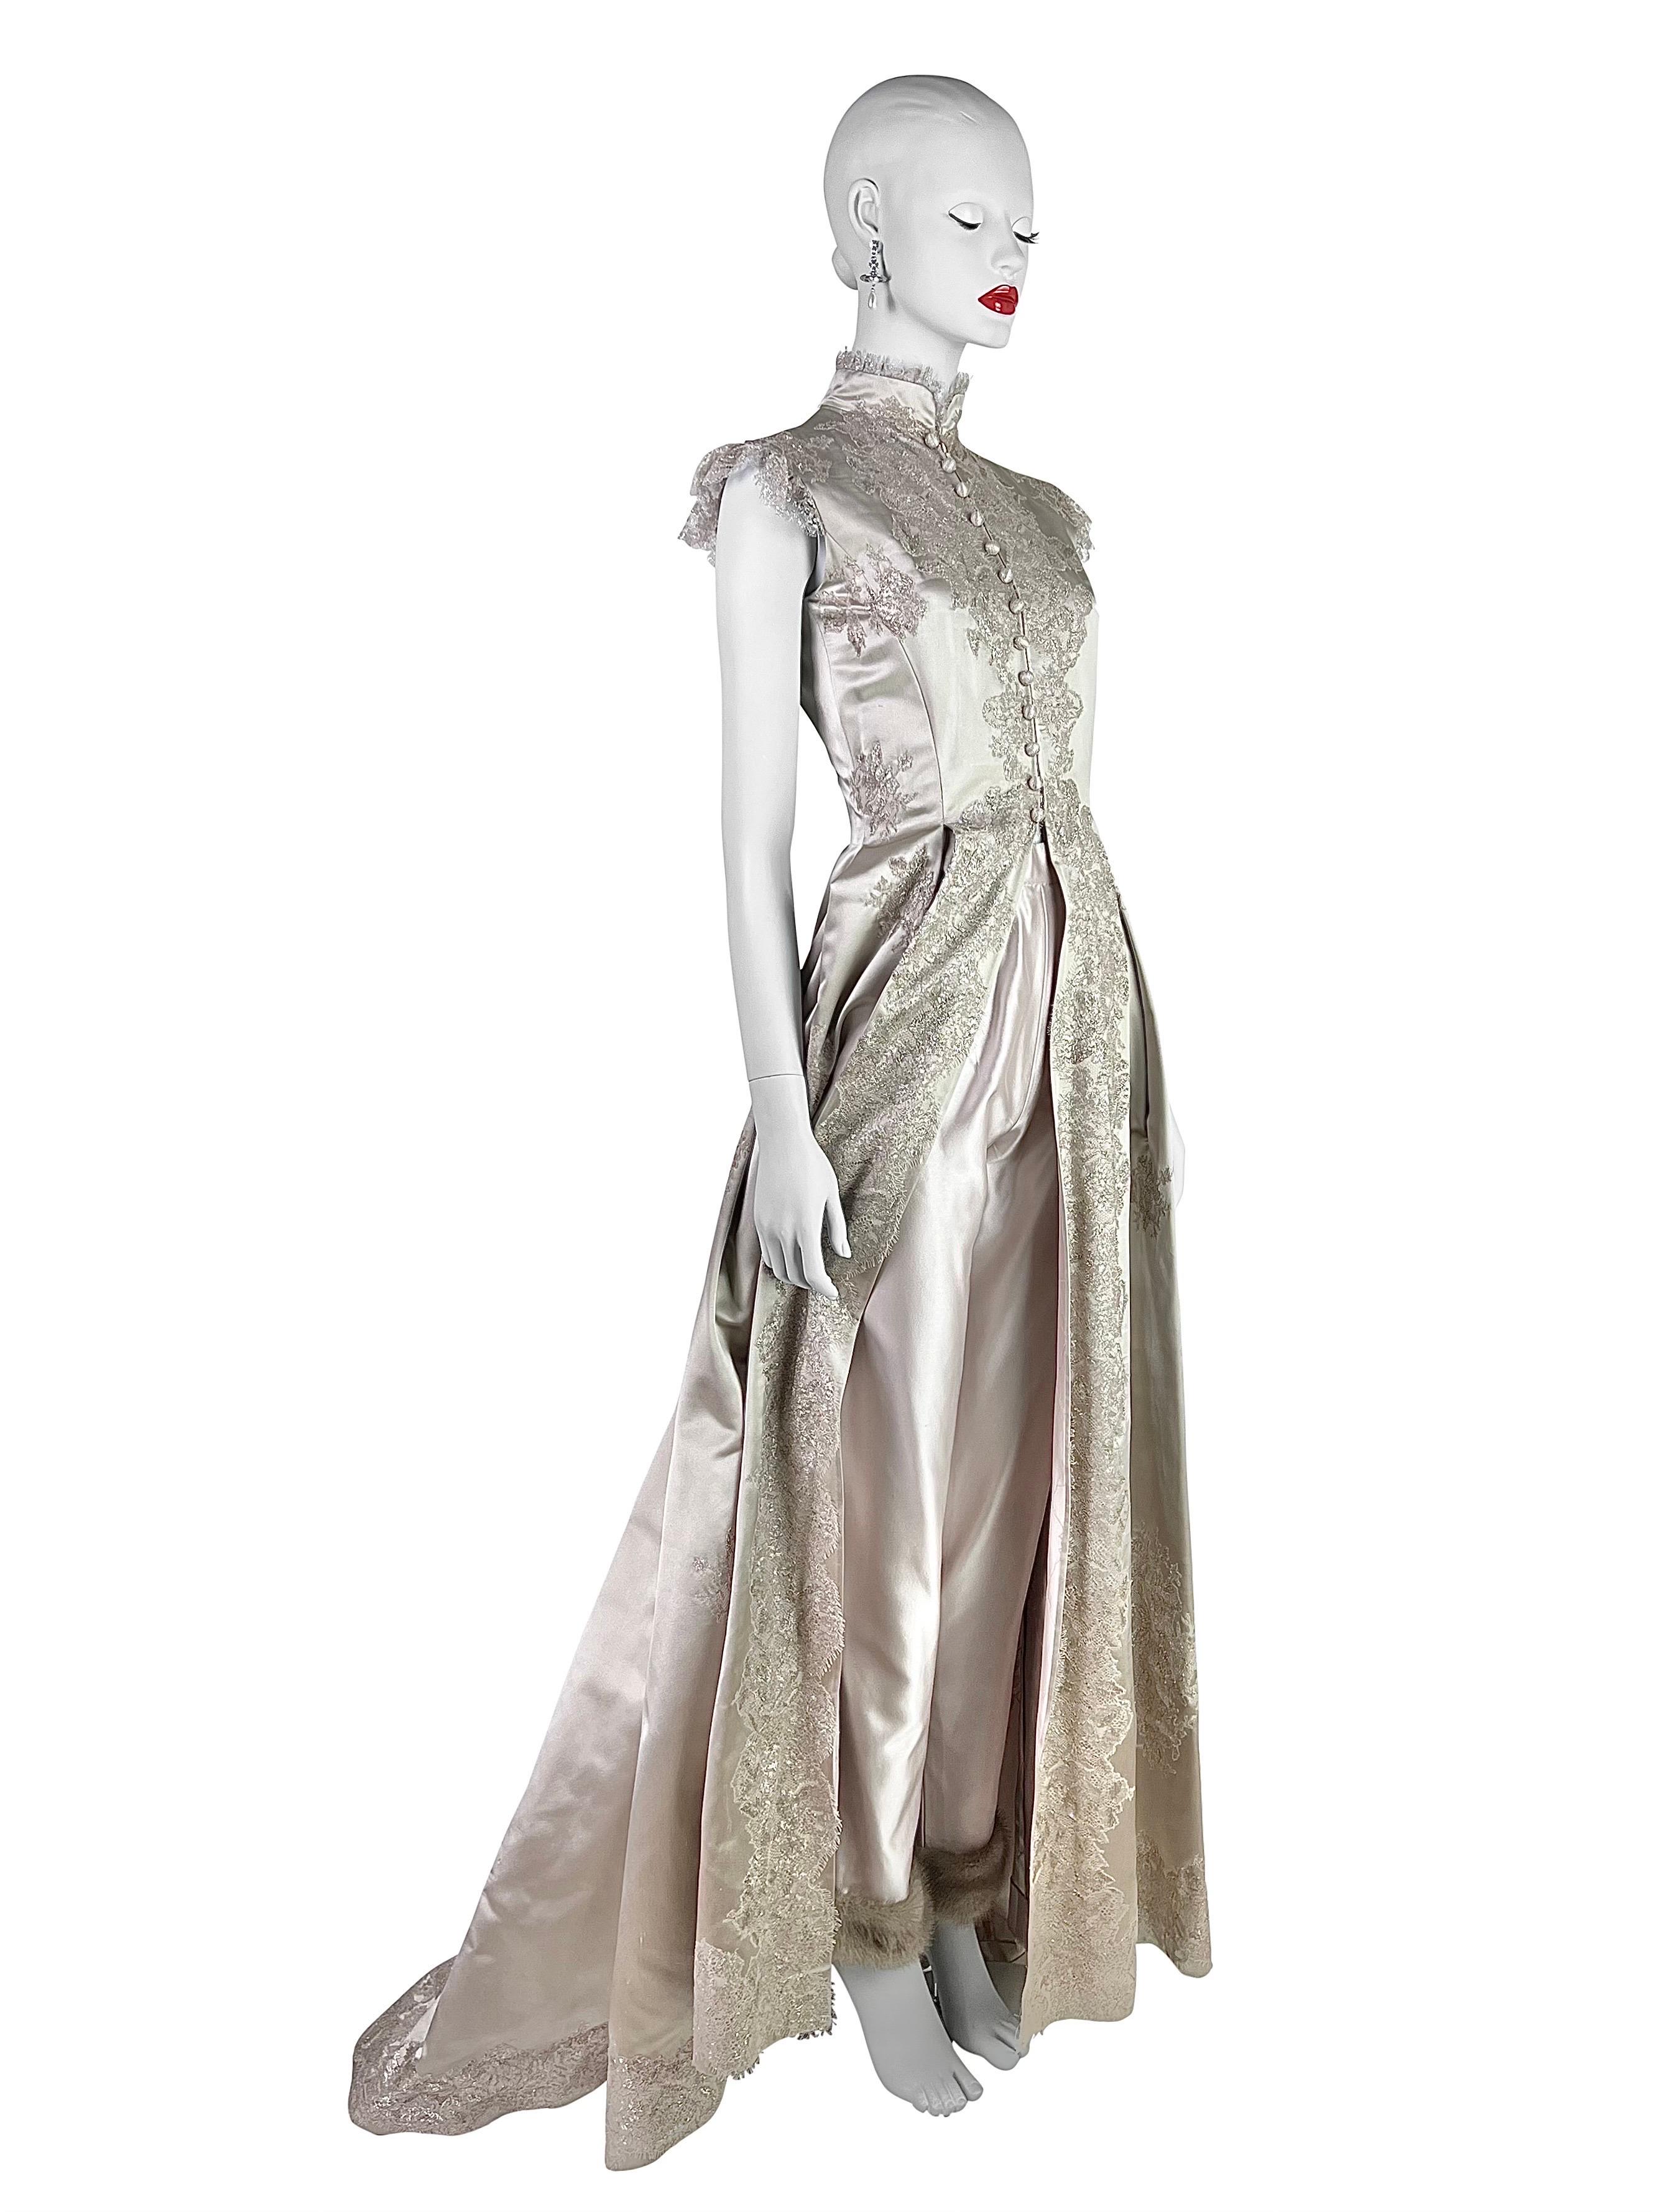 Available exclusively at QV Archive, one-of-a-kind marvelous ensemble straight from the runway of Pierre Balmain Fall 1998 Haute Couture collection, designed by Oscar de la Renta, Look 47. 

The ensemble consists of a silk dress-coat with a closure